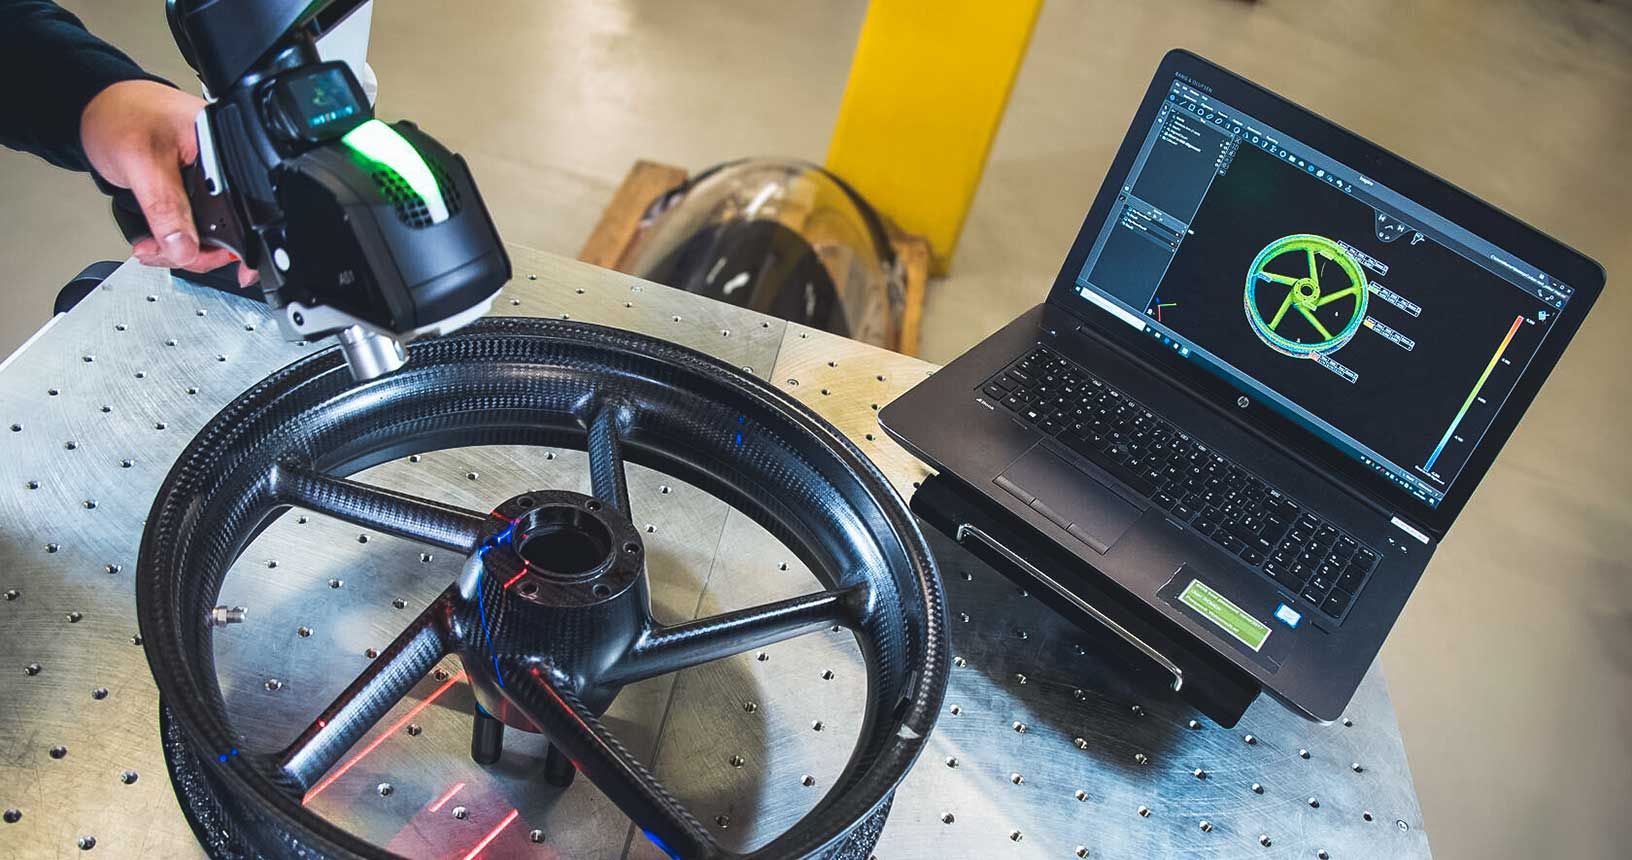 Laser scanning a carbon fibre wheel hub with the Absolute Scanner AS1 mounted on a portable measuring arm with software on laptop screen.